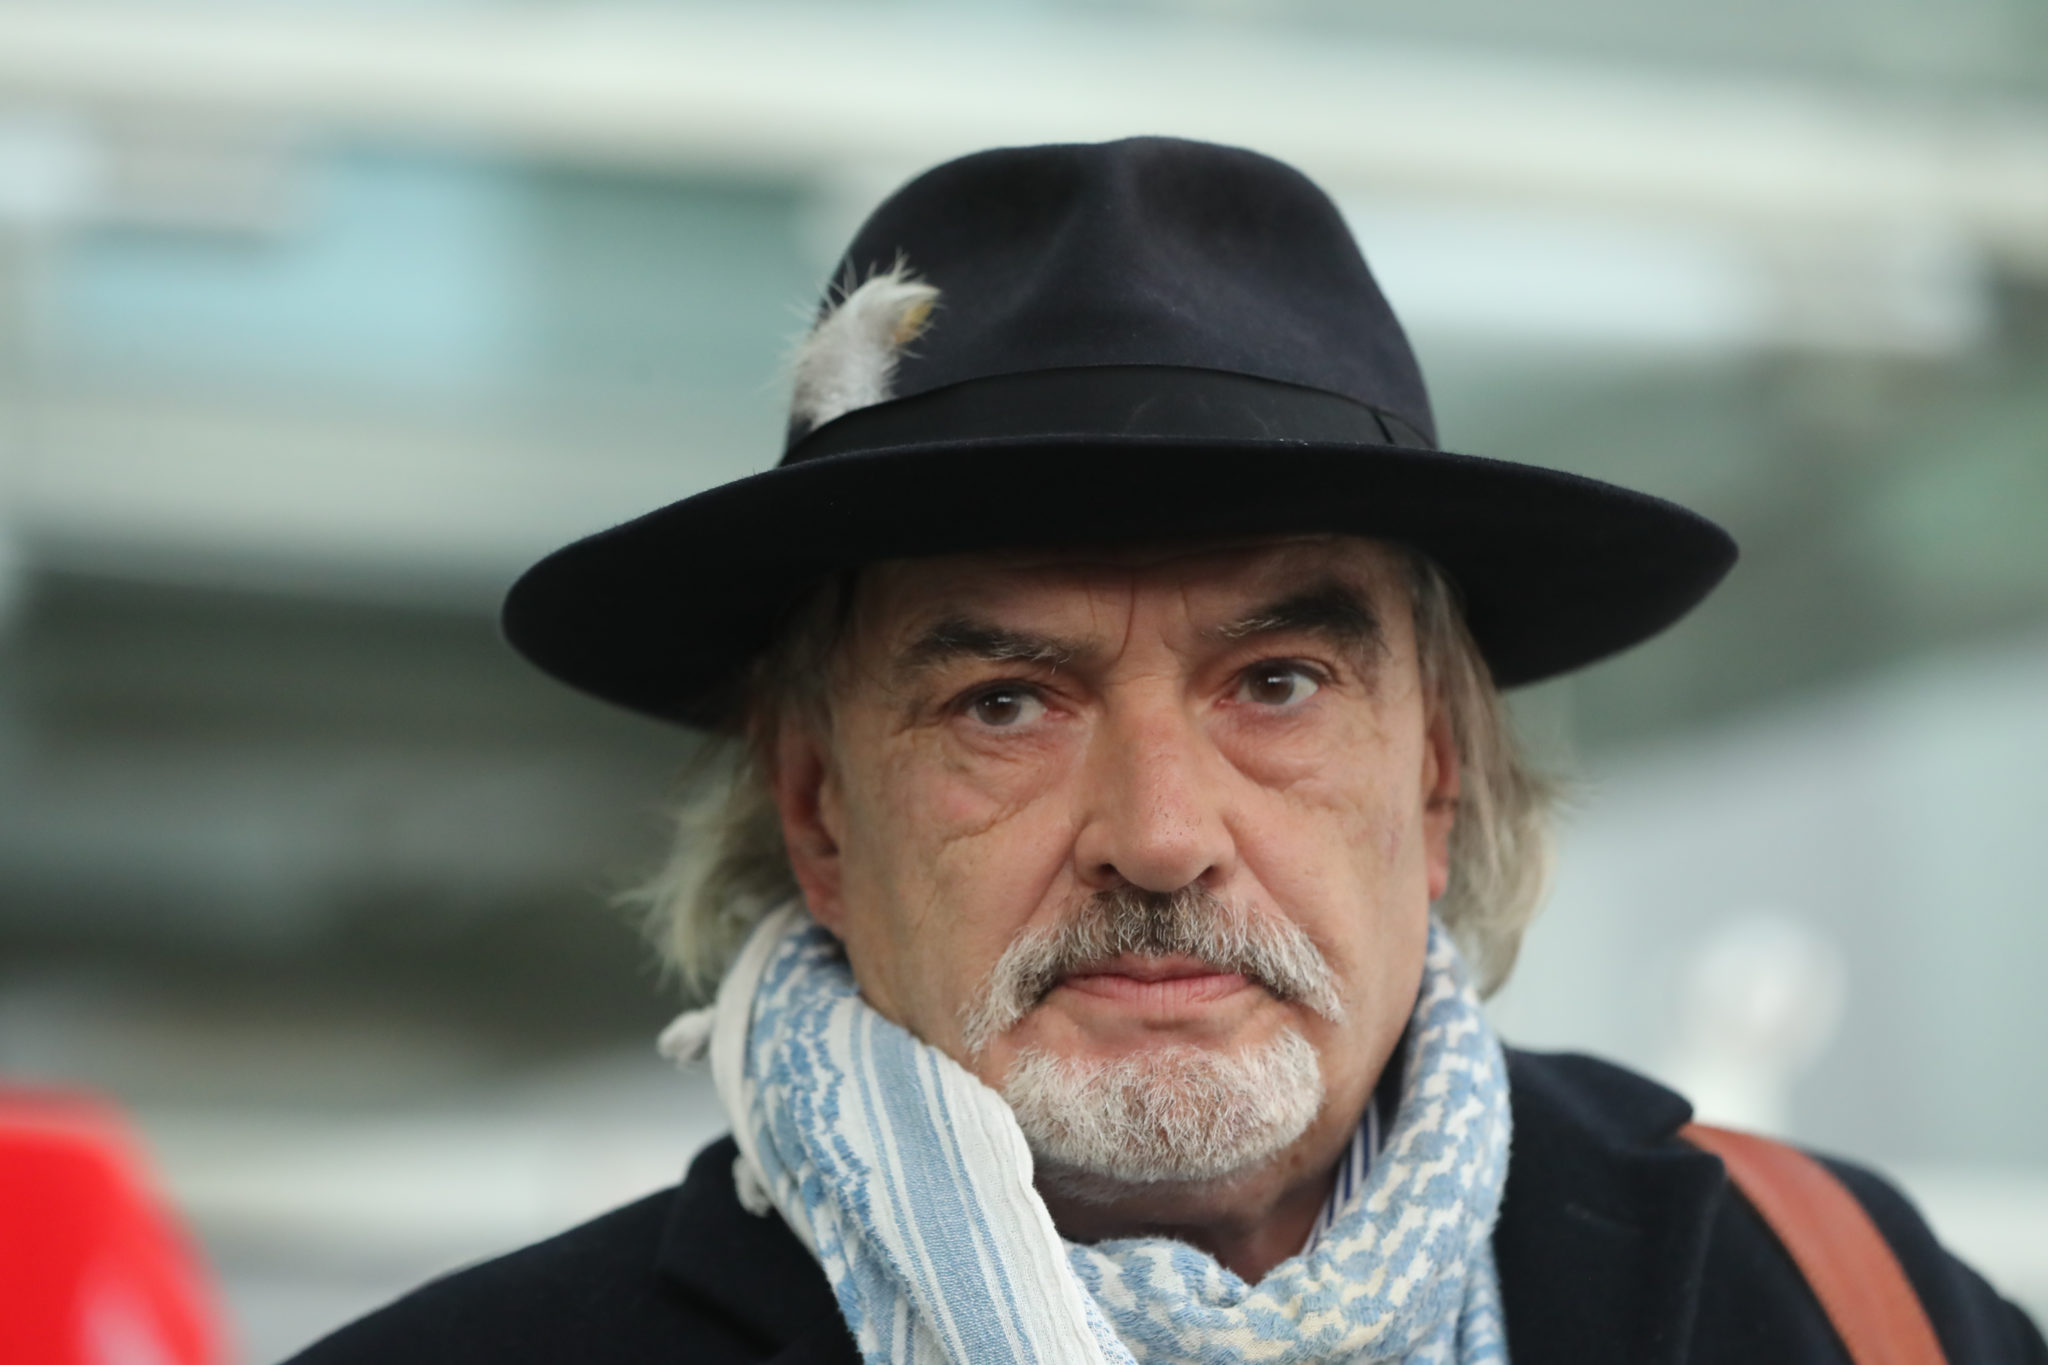 Ian Bailey outside the High Court in Dublin, after the court rejected an attempt by French authorities to extradite him for the murder of Sophie Toscan du Plantier in October 2020